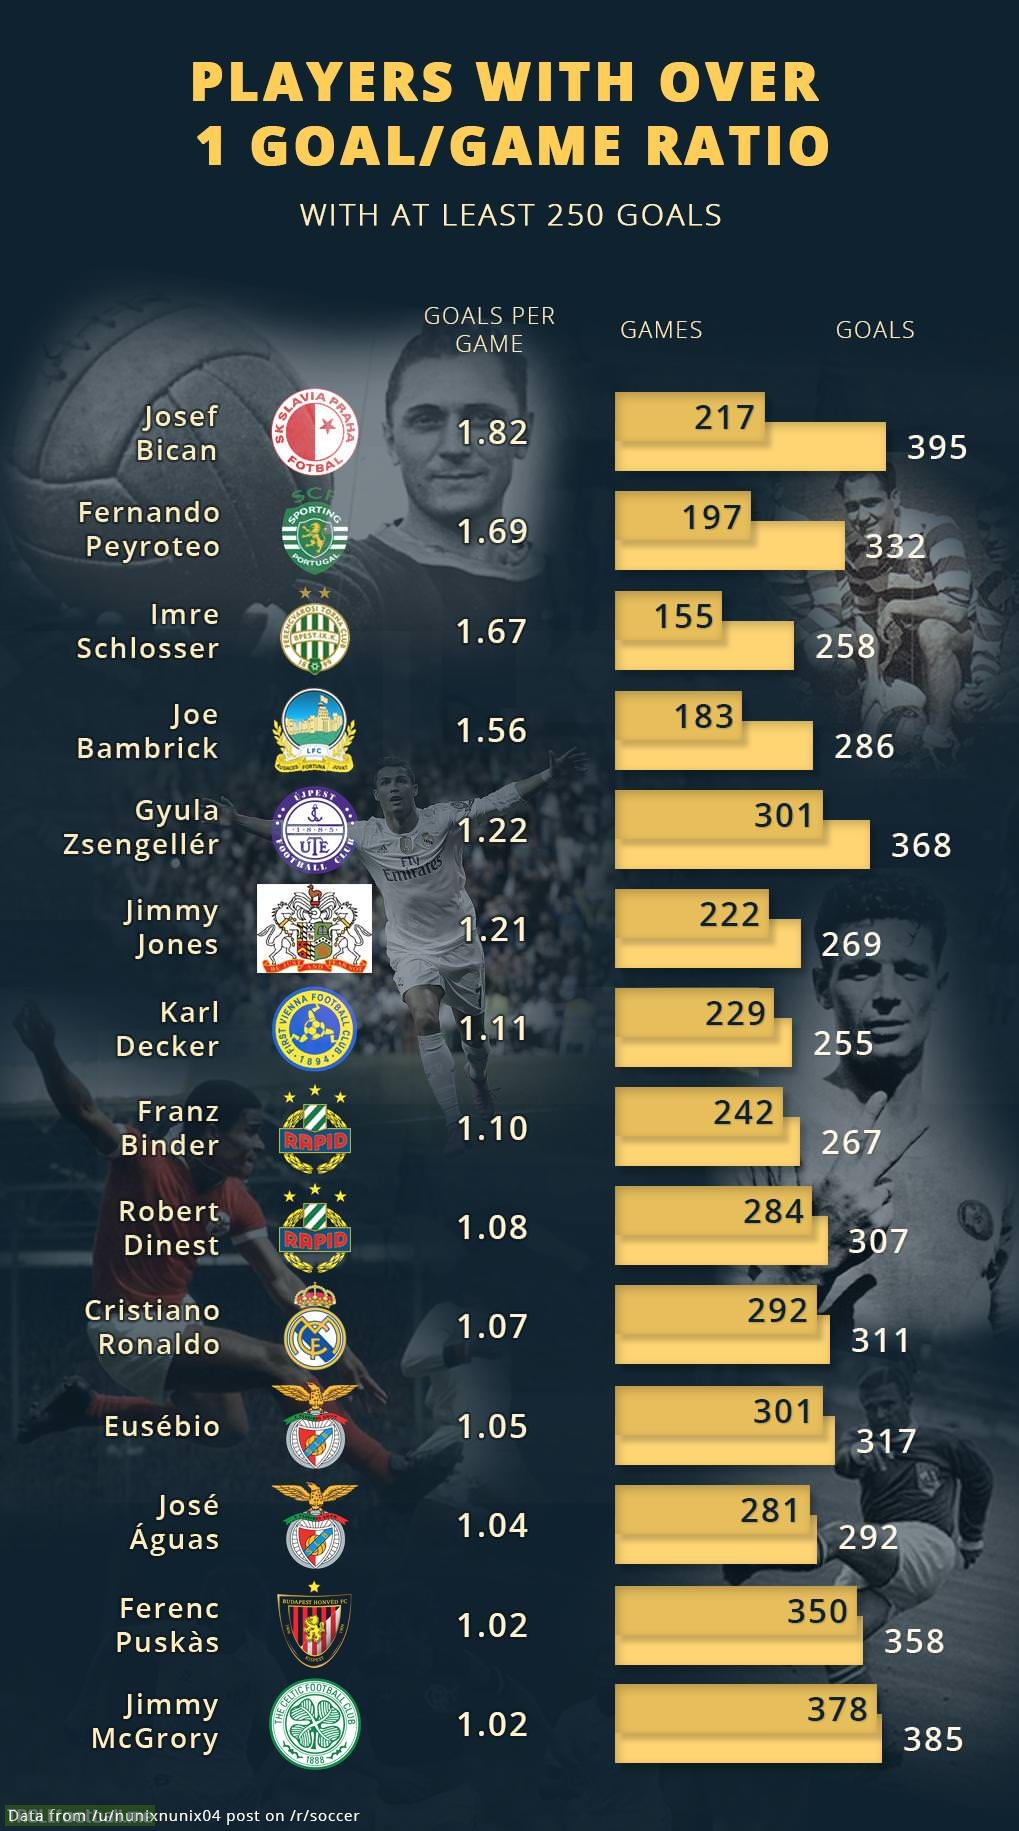 [OC] Cristiano Ronaldo joins exclusive list of players with over a goal-a-game ratio for a club in the league (min. 250 goals)